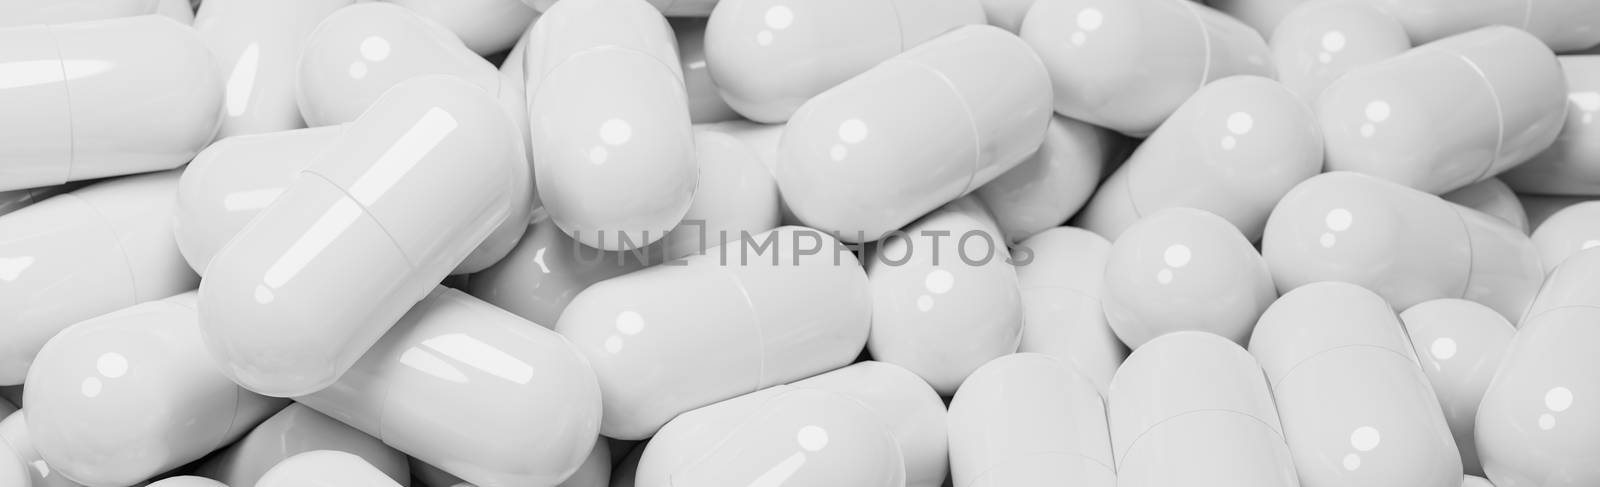 Close up of many white pills capsules. Medicine and pharmacy concept.,3d model and illustration. by anotestocker